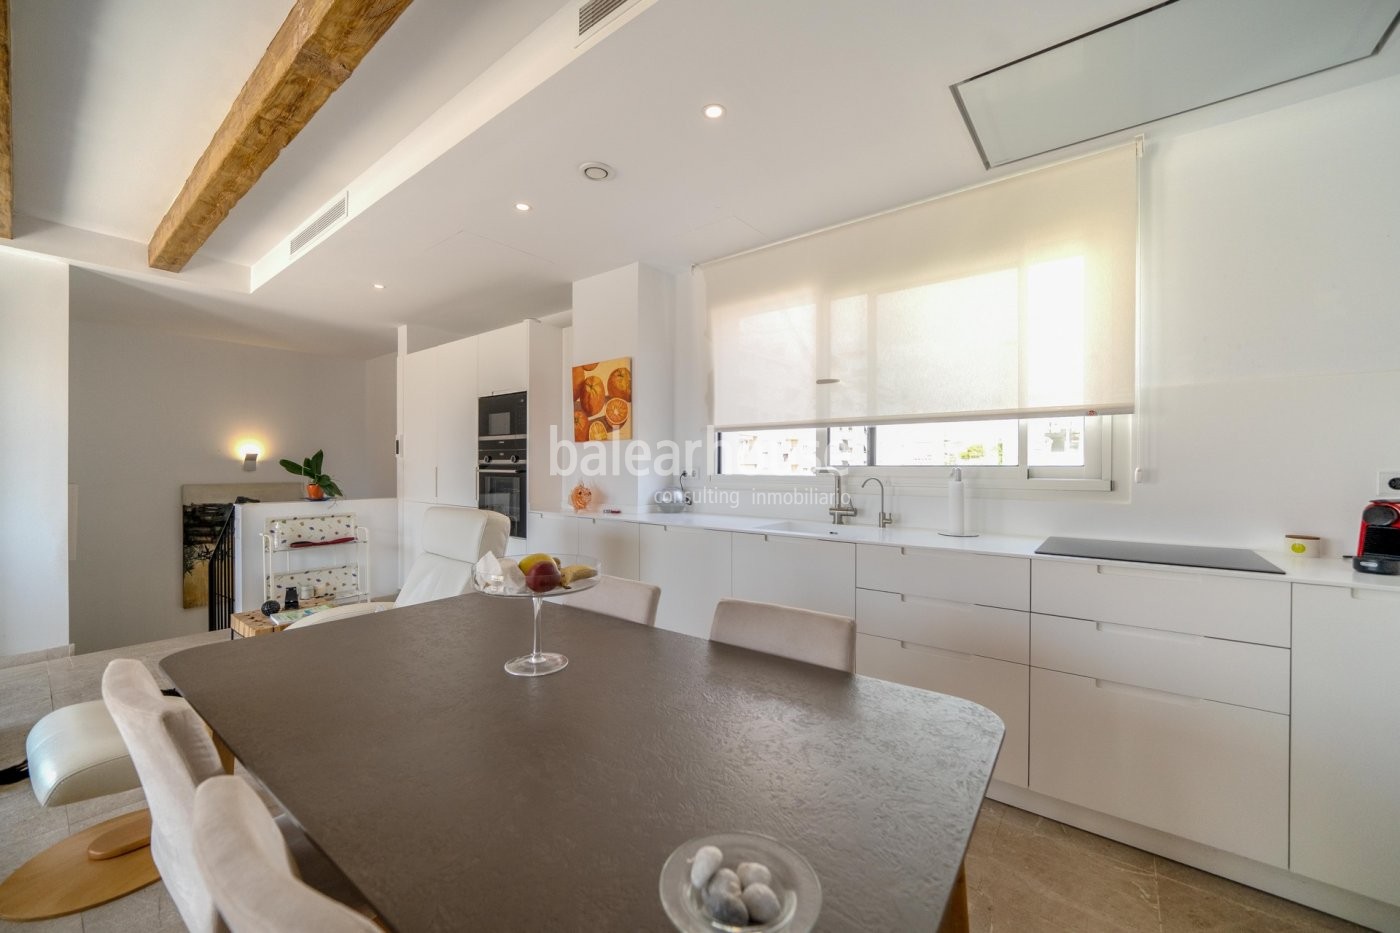 Spacious south facing penthouse with a sunny terrace and modern rooms in the centre of Palma.